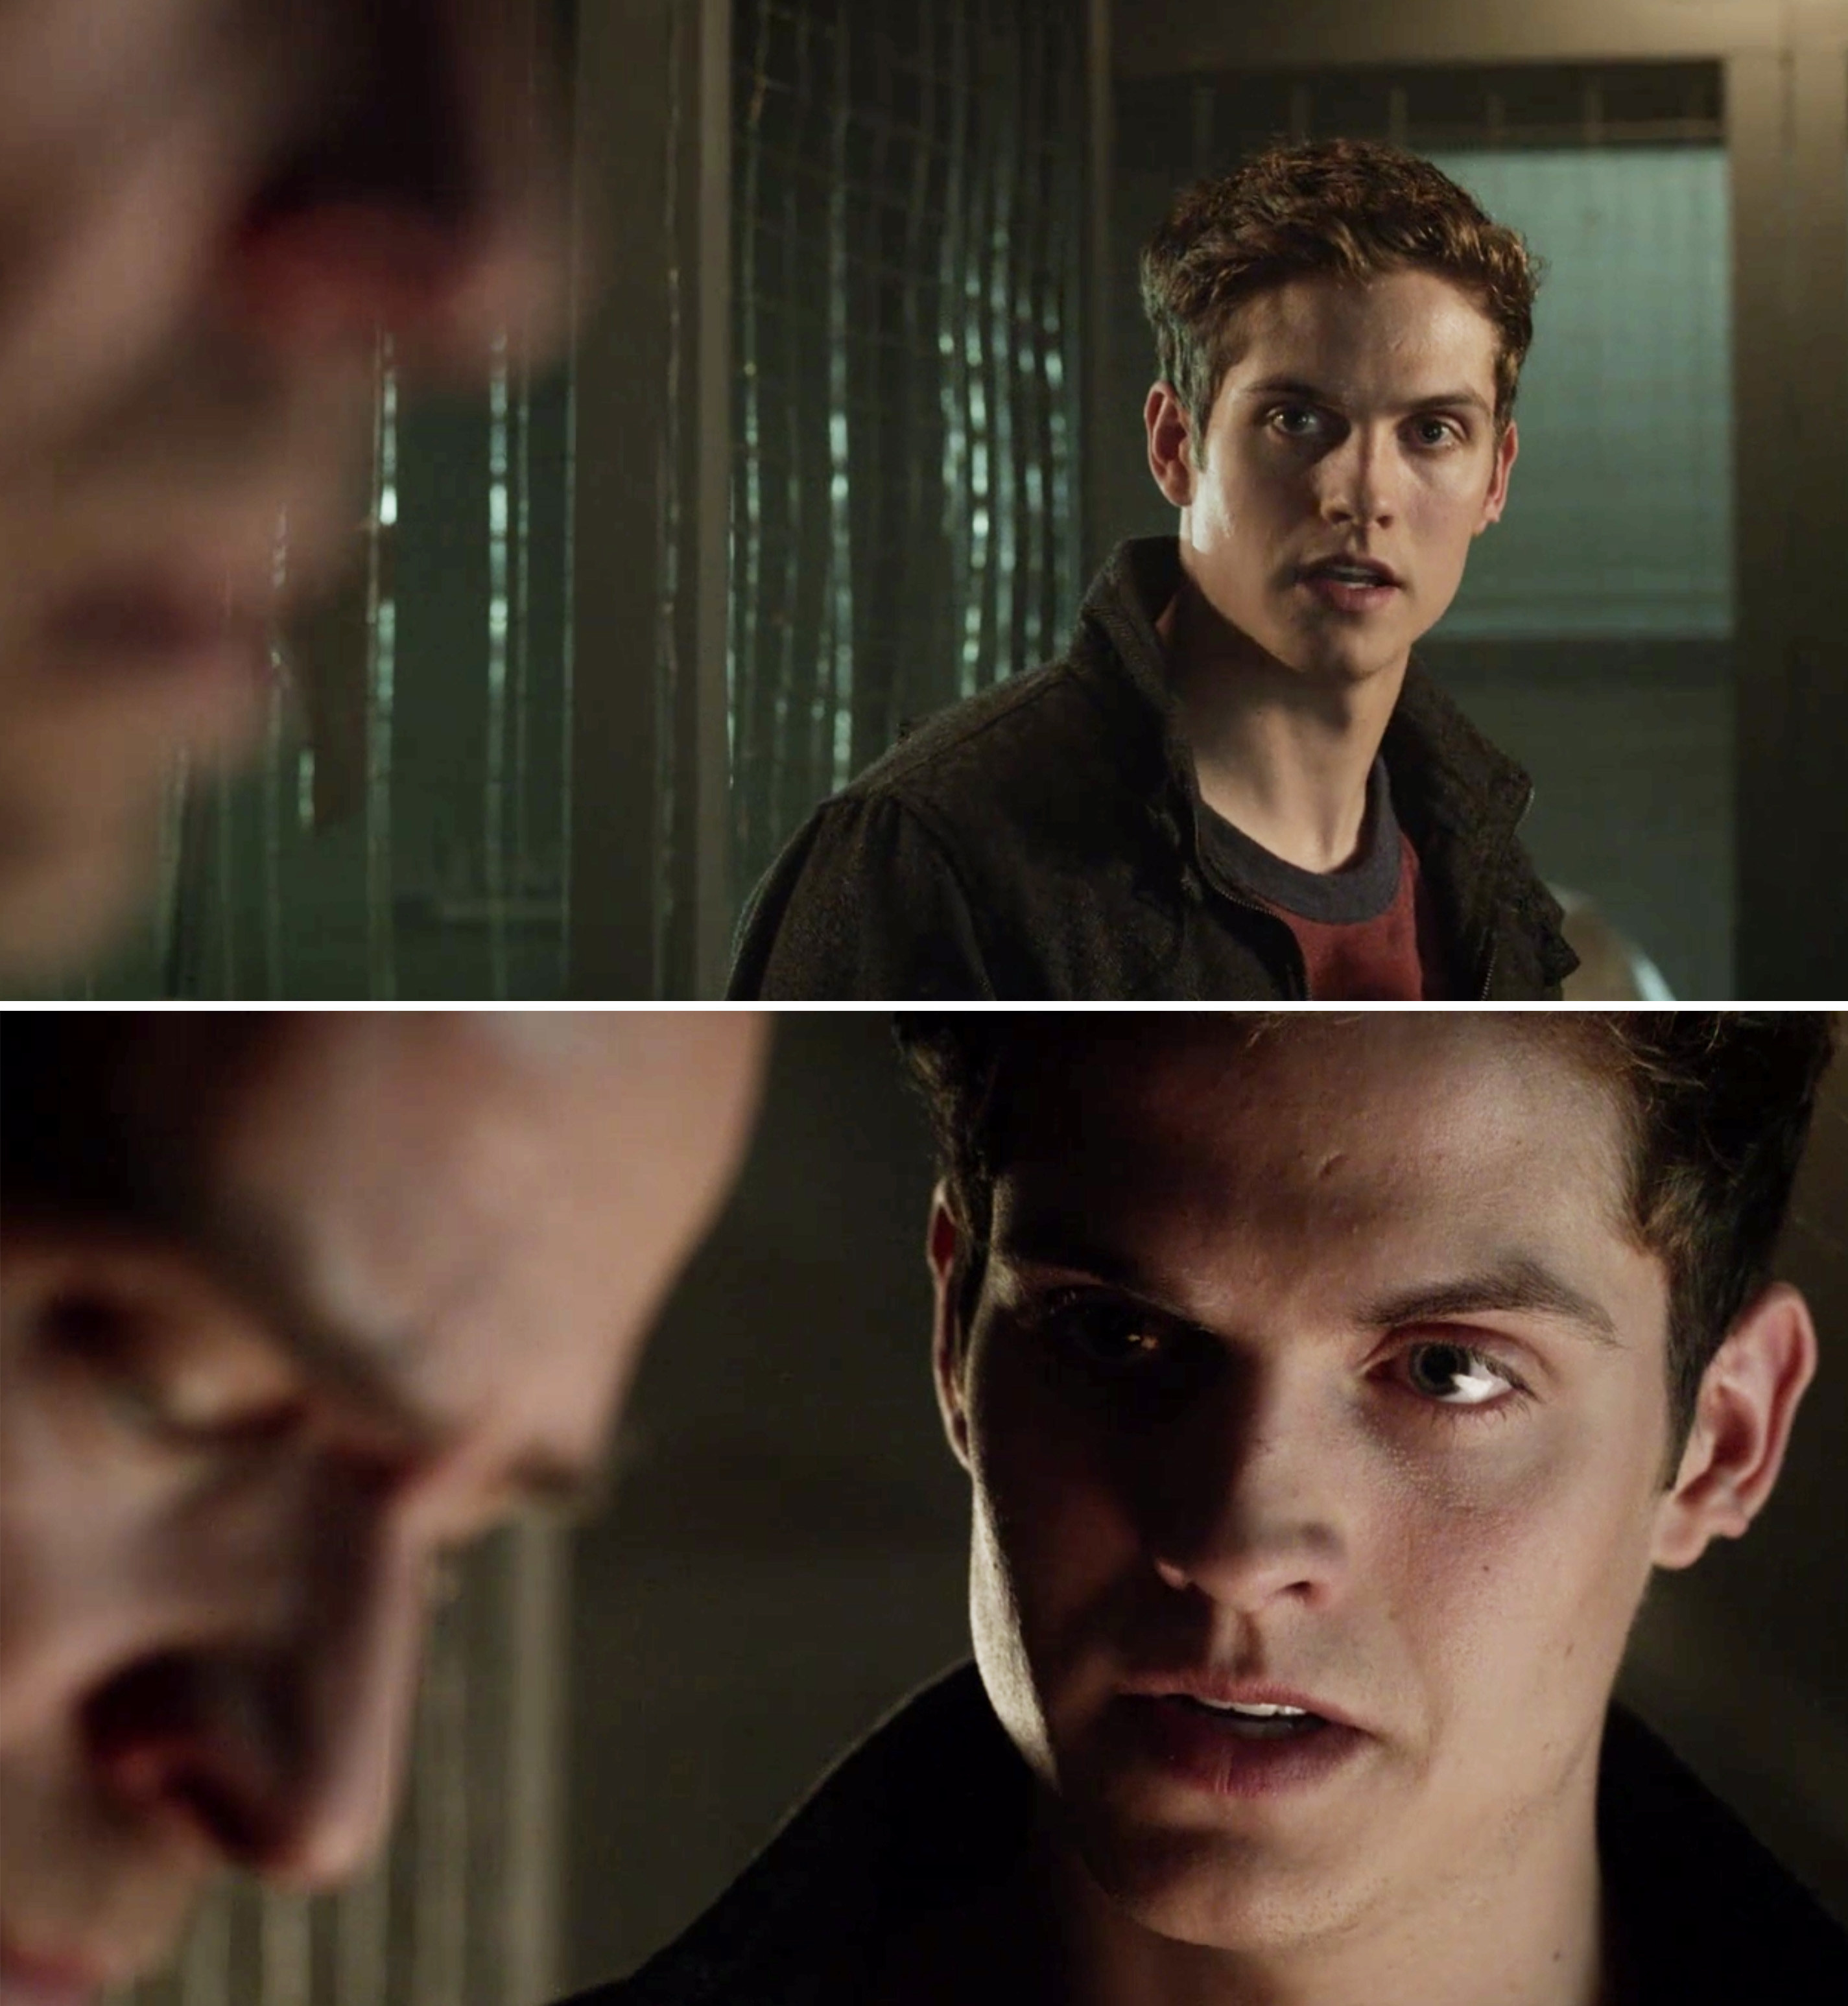 Isaac talking to Mr. Argent